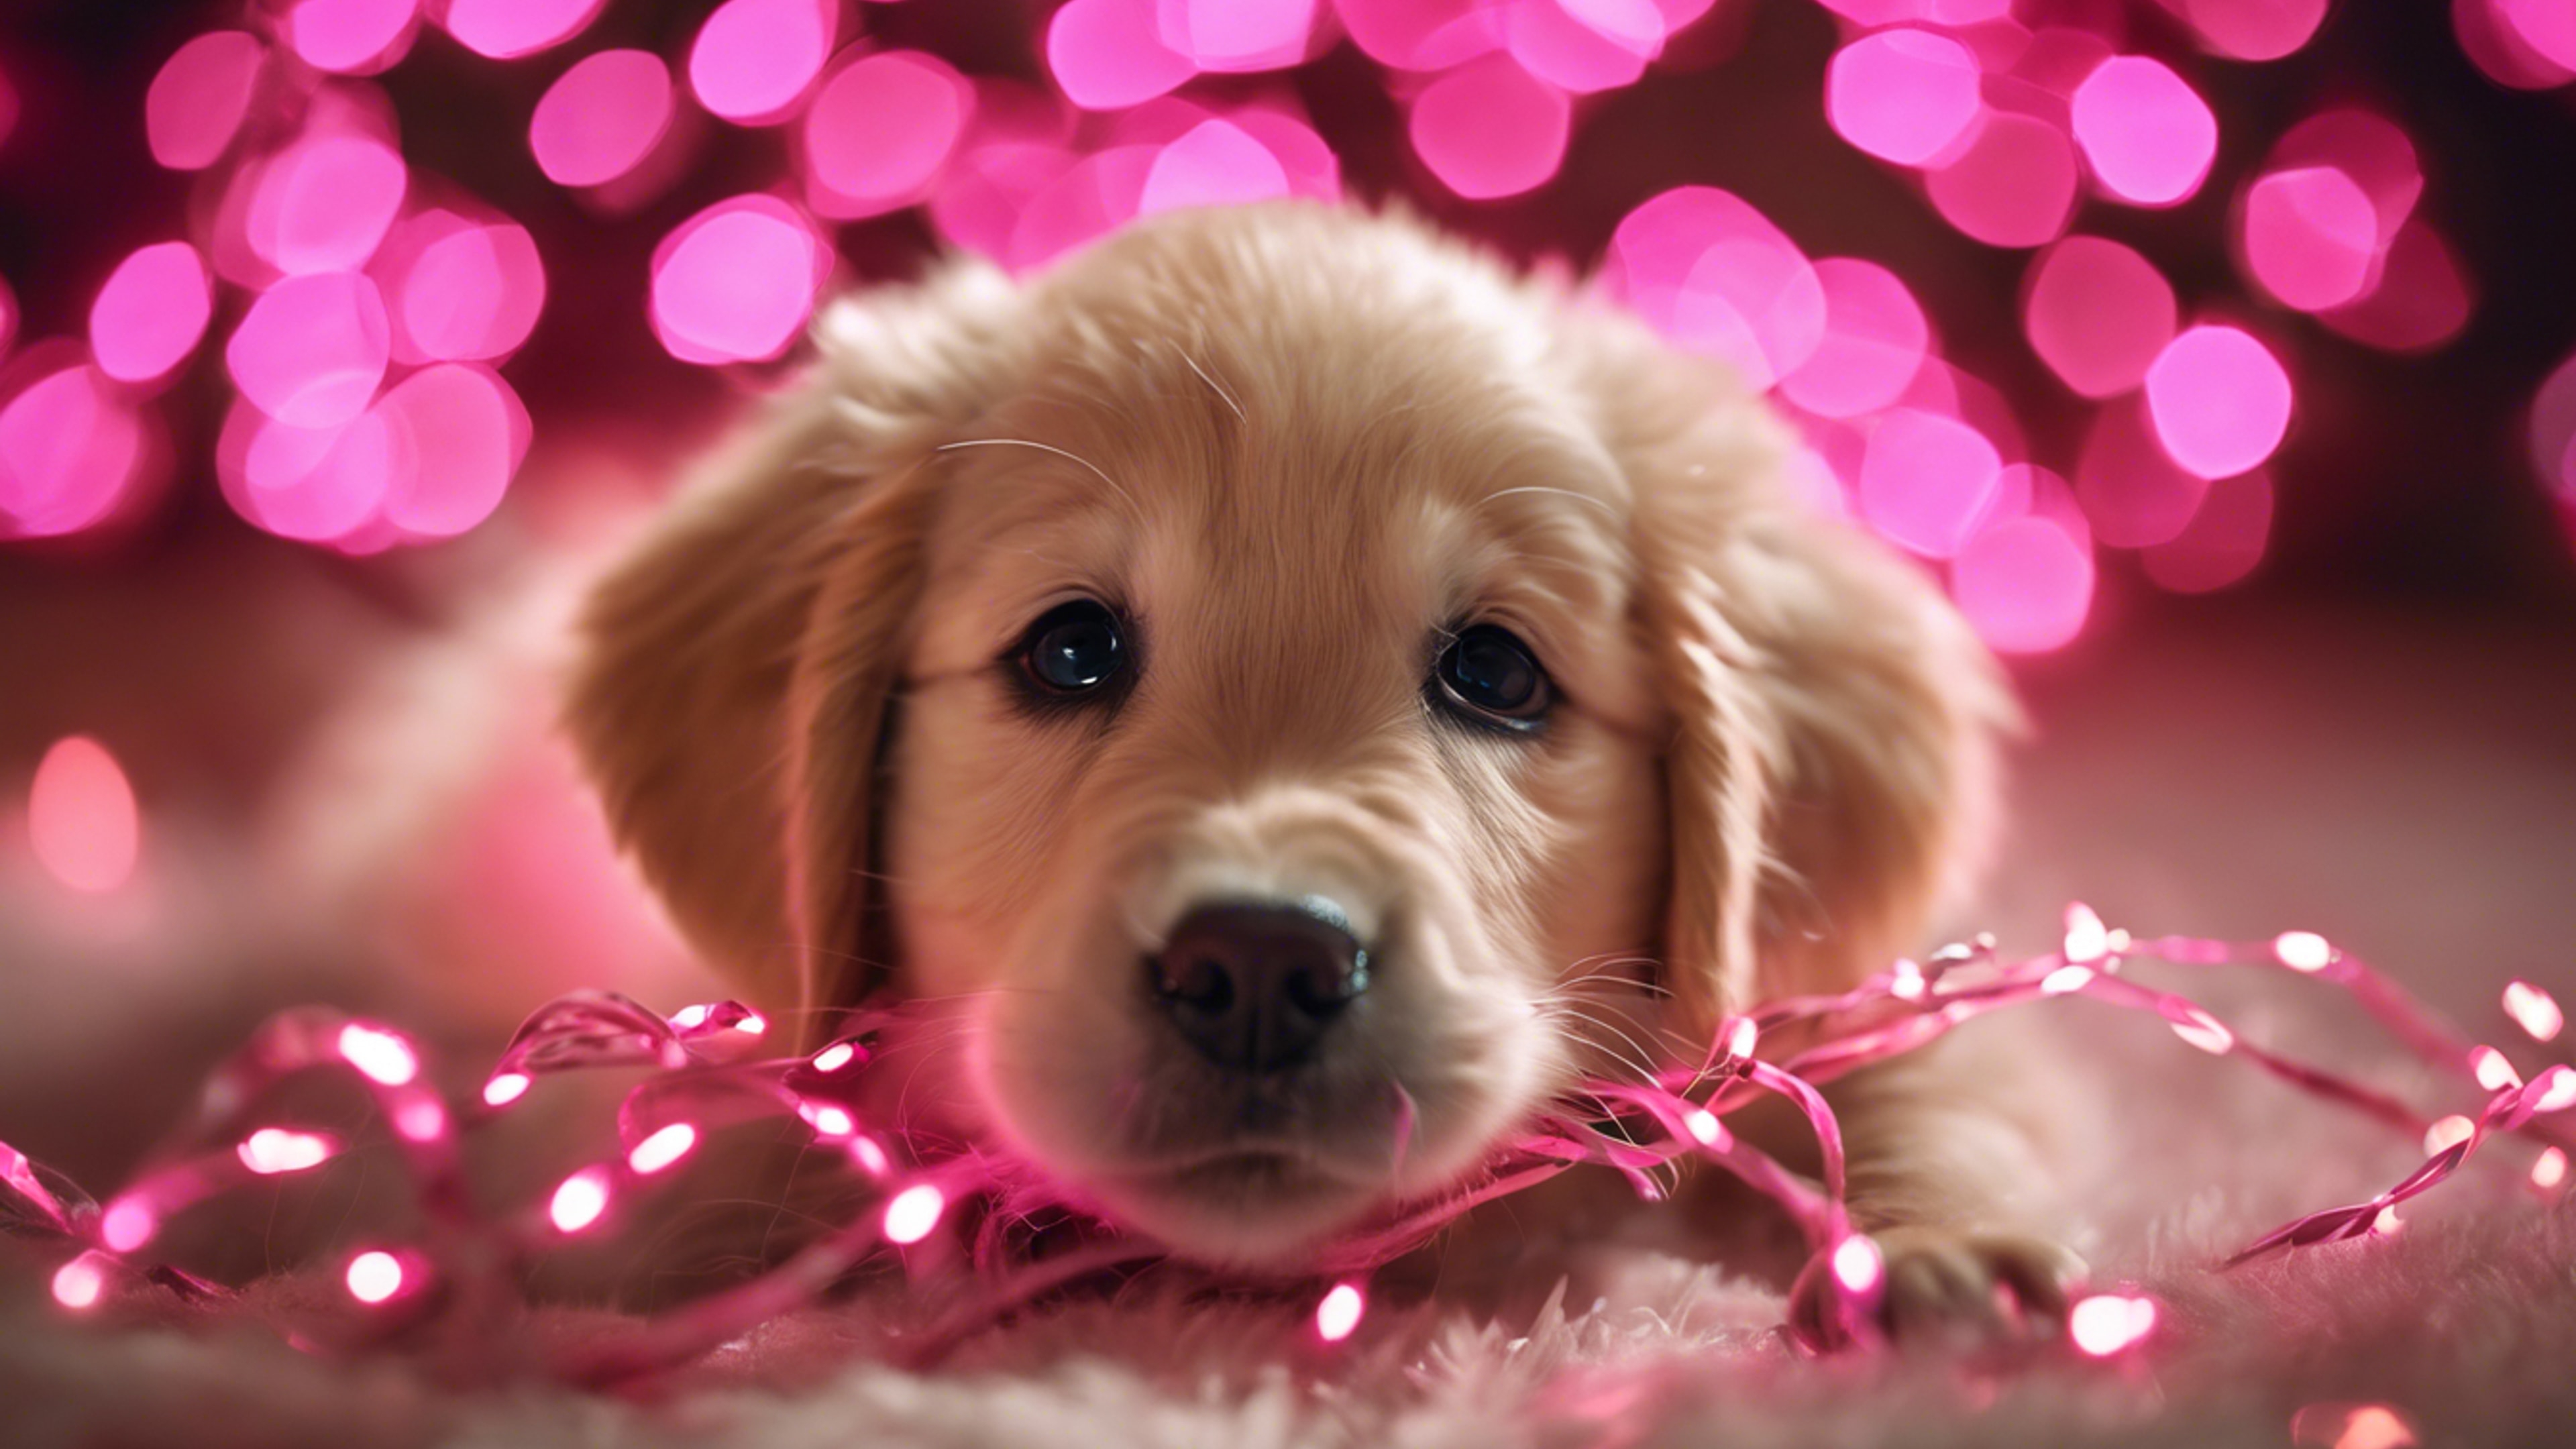 A golden retriever puppy adorably tangled in pink Christmas lights. Ταπετσαρία[26994d3815c0460ab11e]